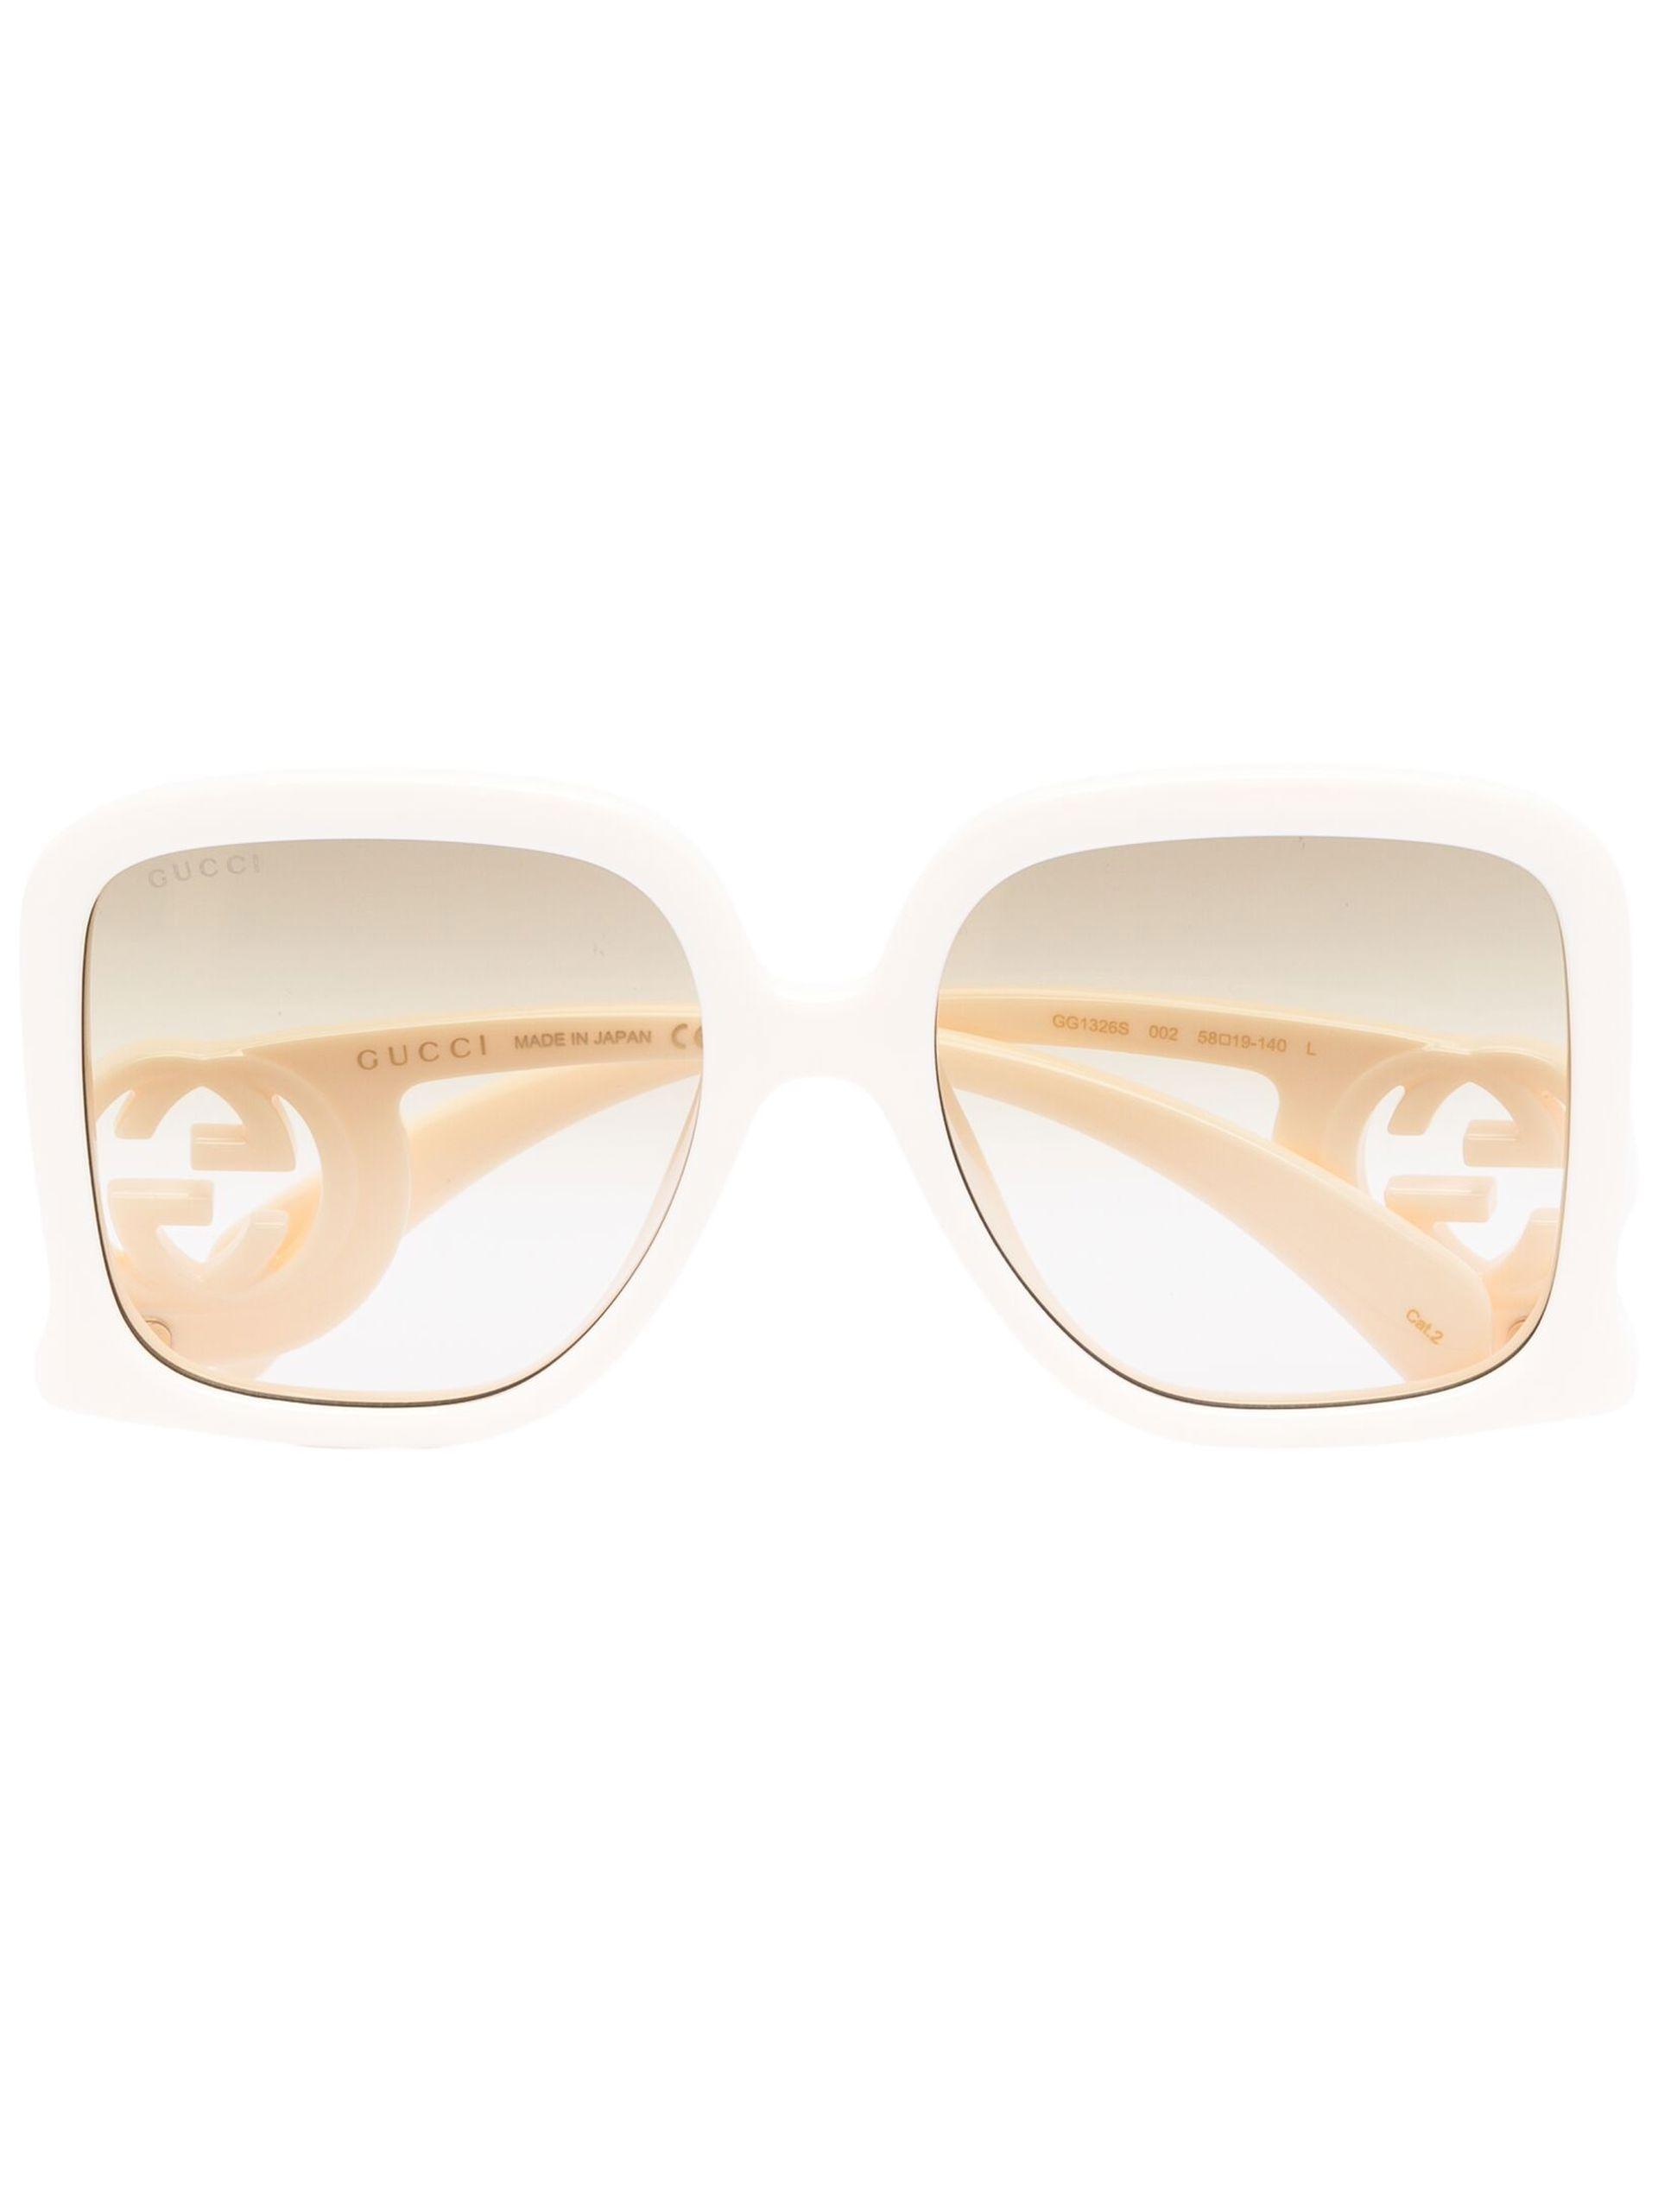 Gucci Chaise-lounge Oversized Sunglasses in Natural | Lyst